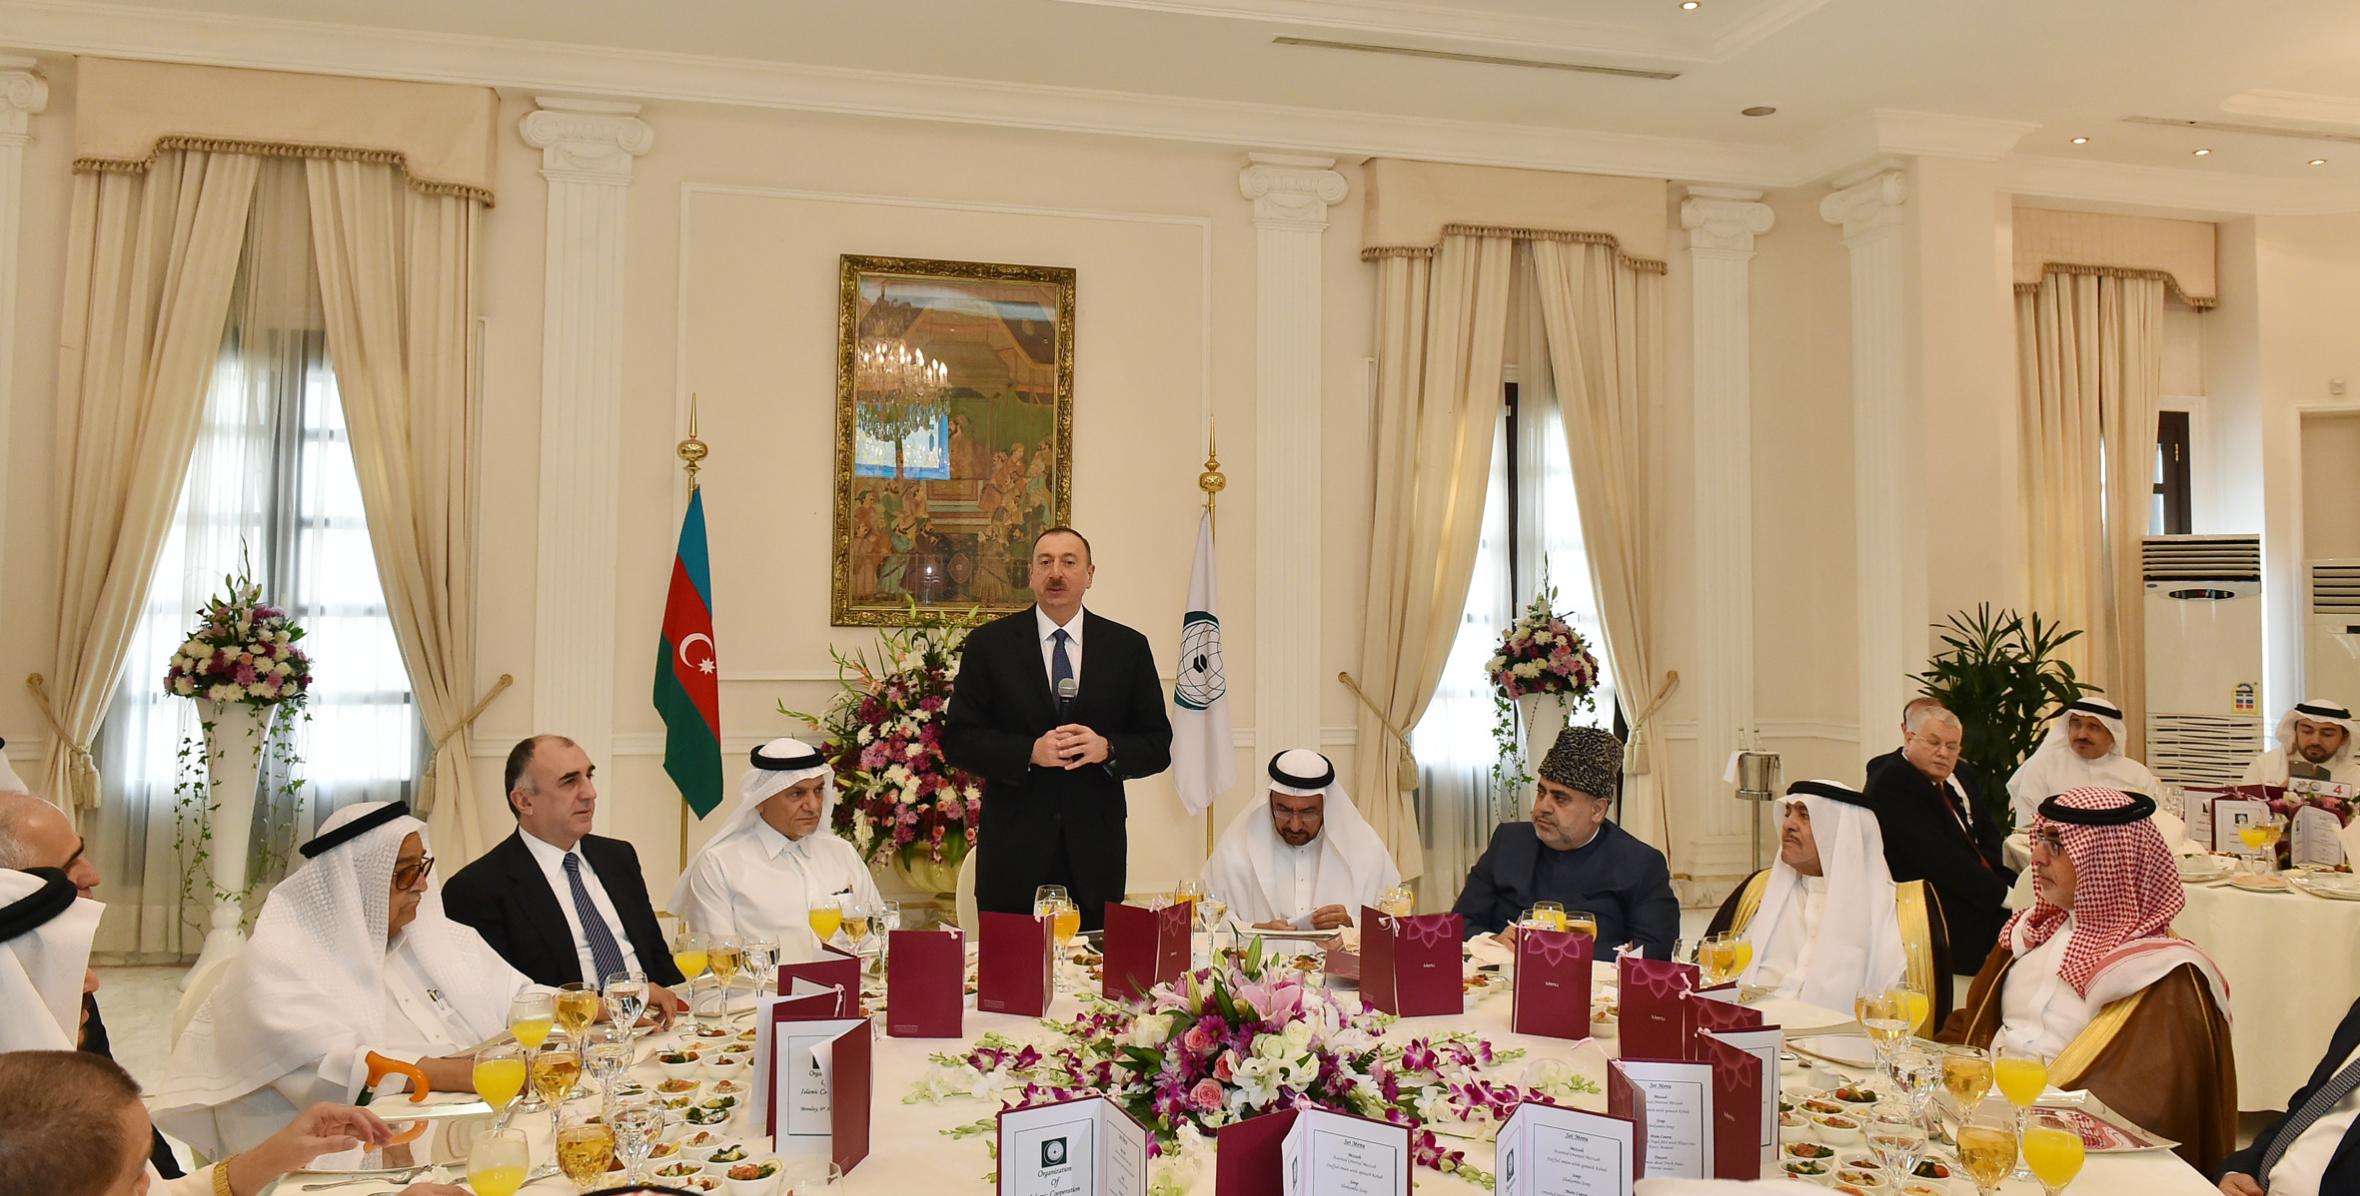 Ilham Aliyev met with the Secretary General of the Organization of Islamic Cooperation